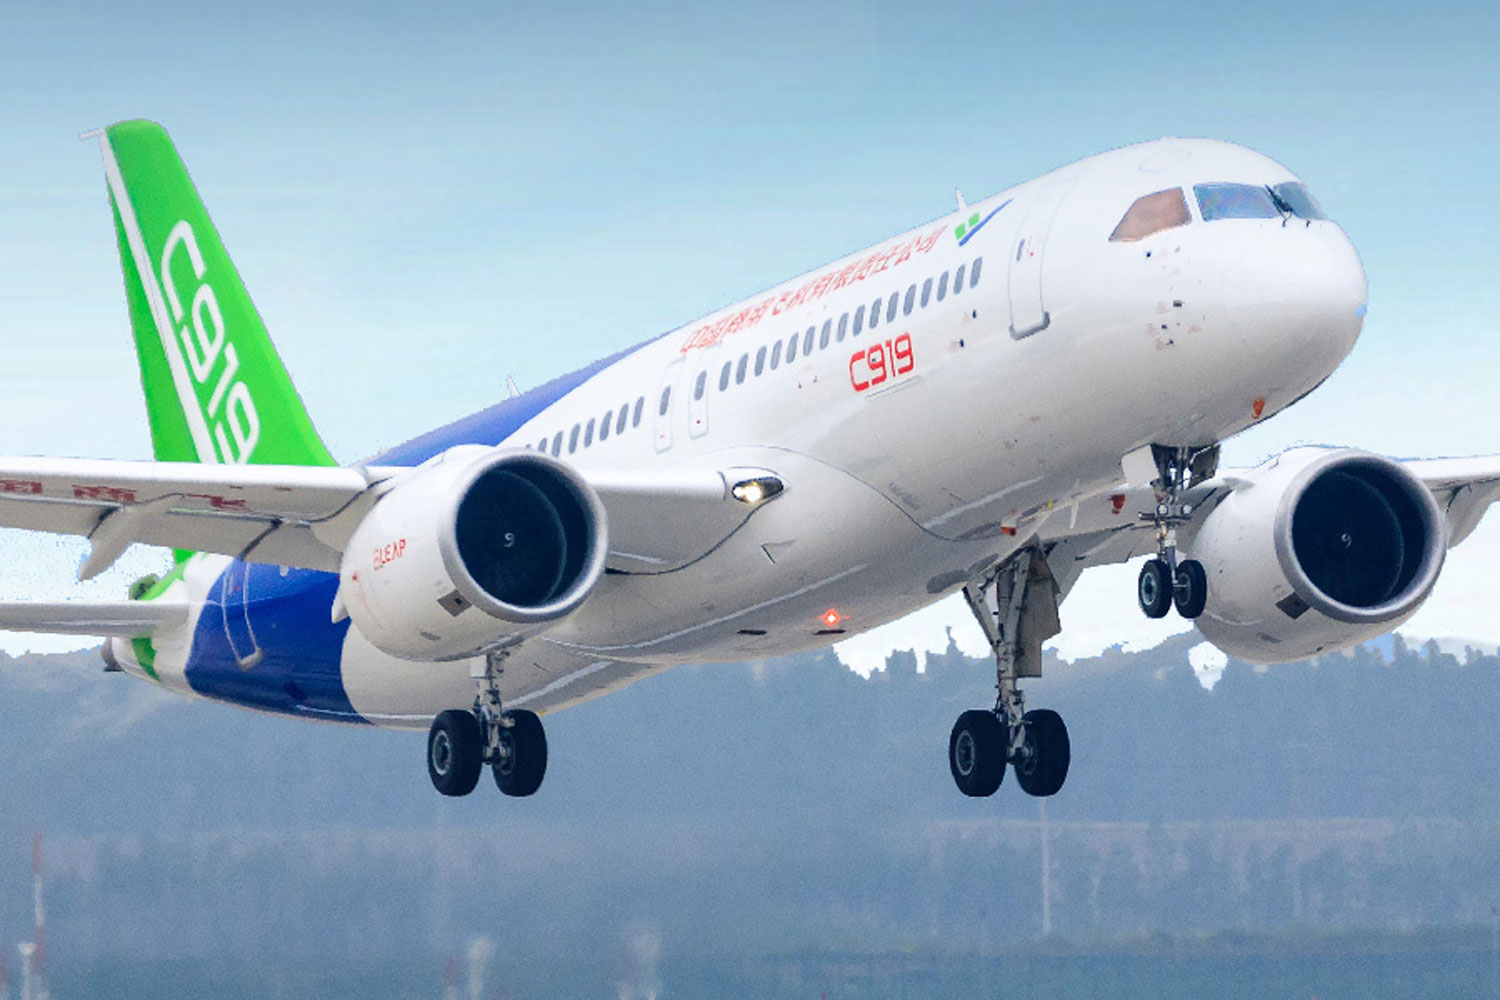 The Chinese COMAC C919 Receives Type Certification